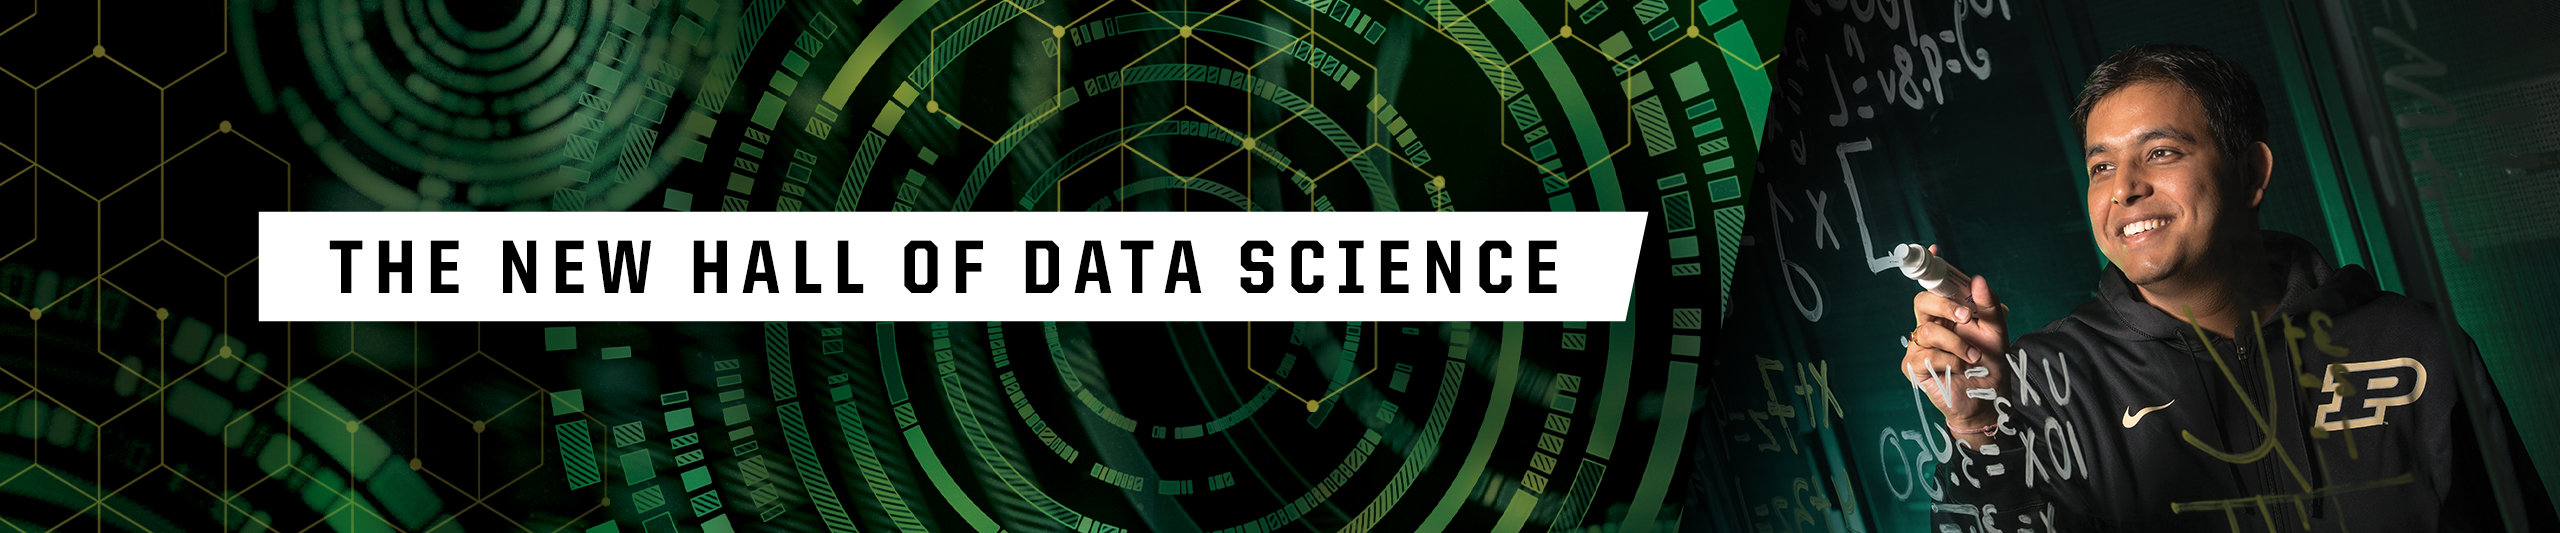 The New Hall of Data Science